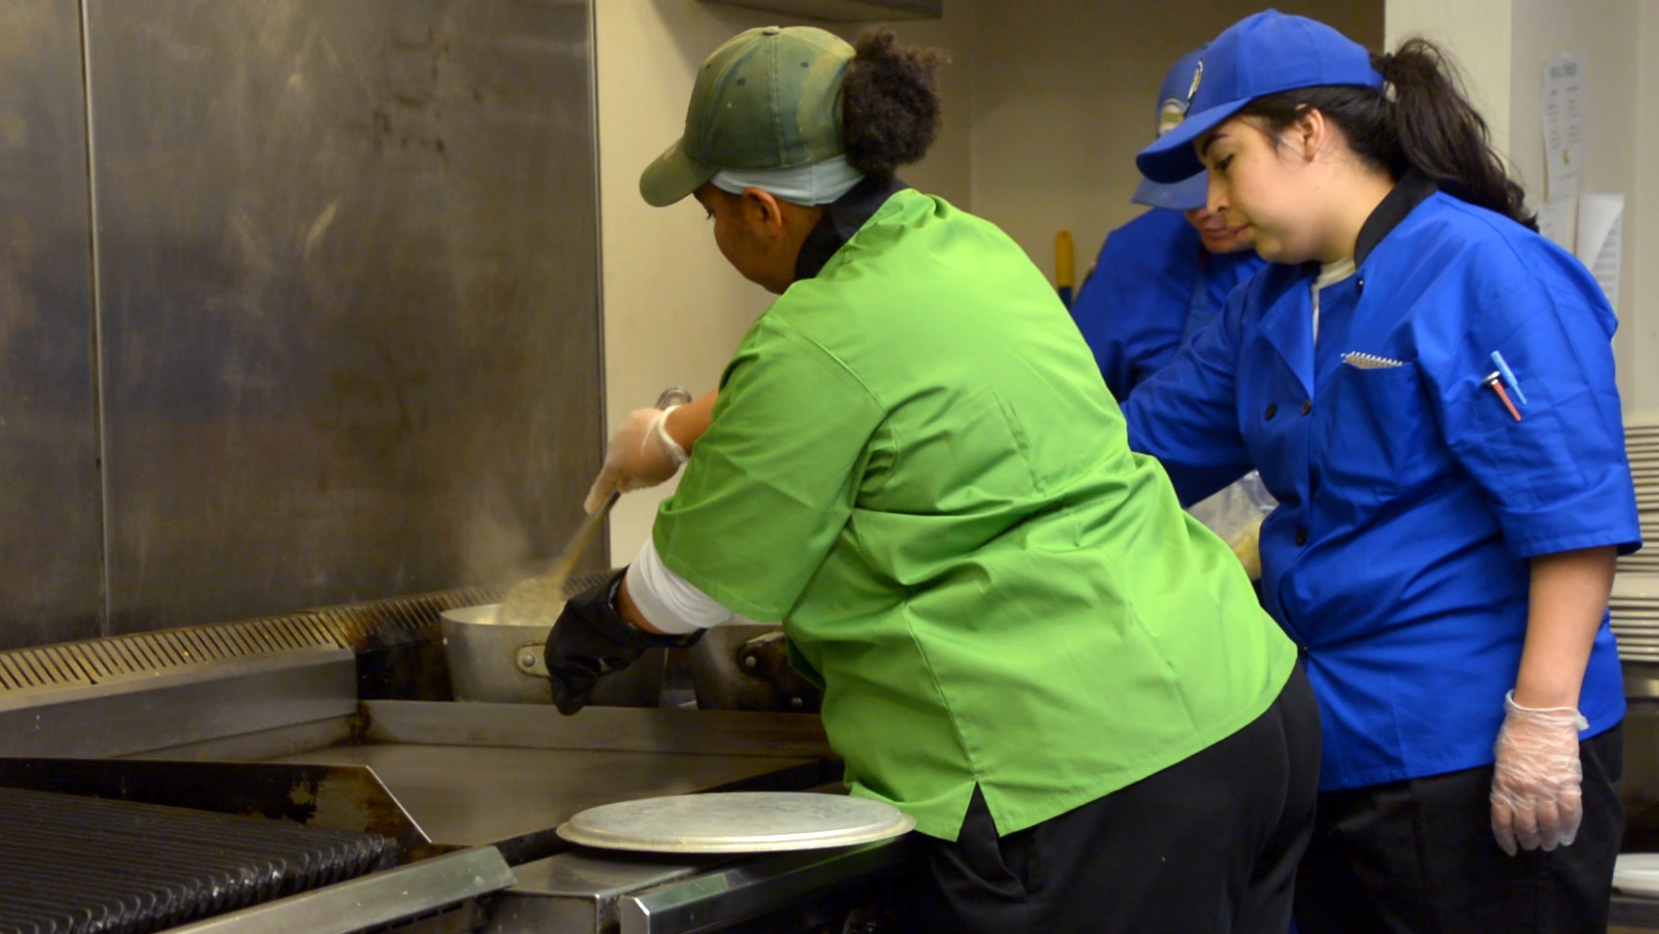 A green-hatted Corpsmember stirs a pot on the stove as two blue-hatted Corpsmembers observe.